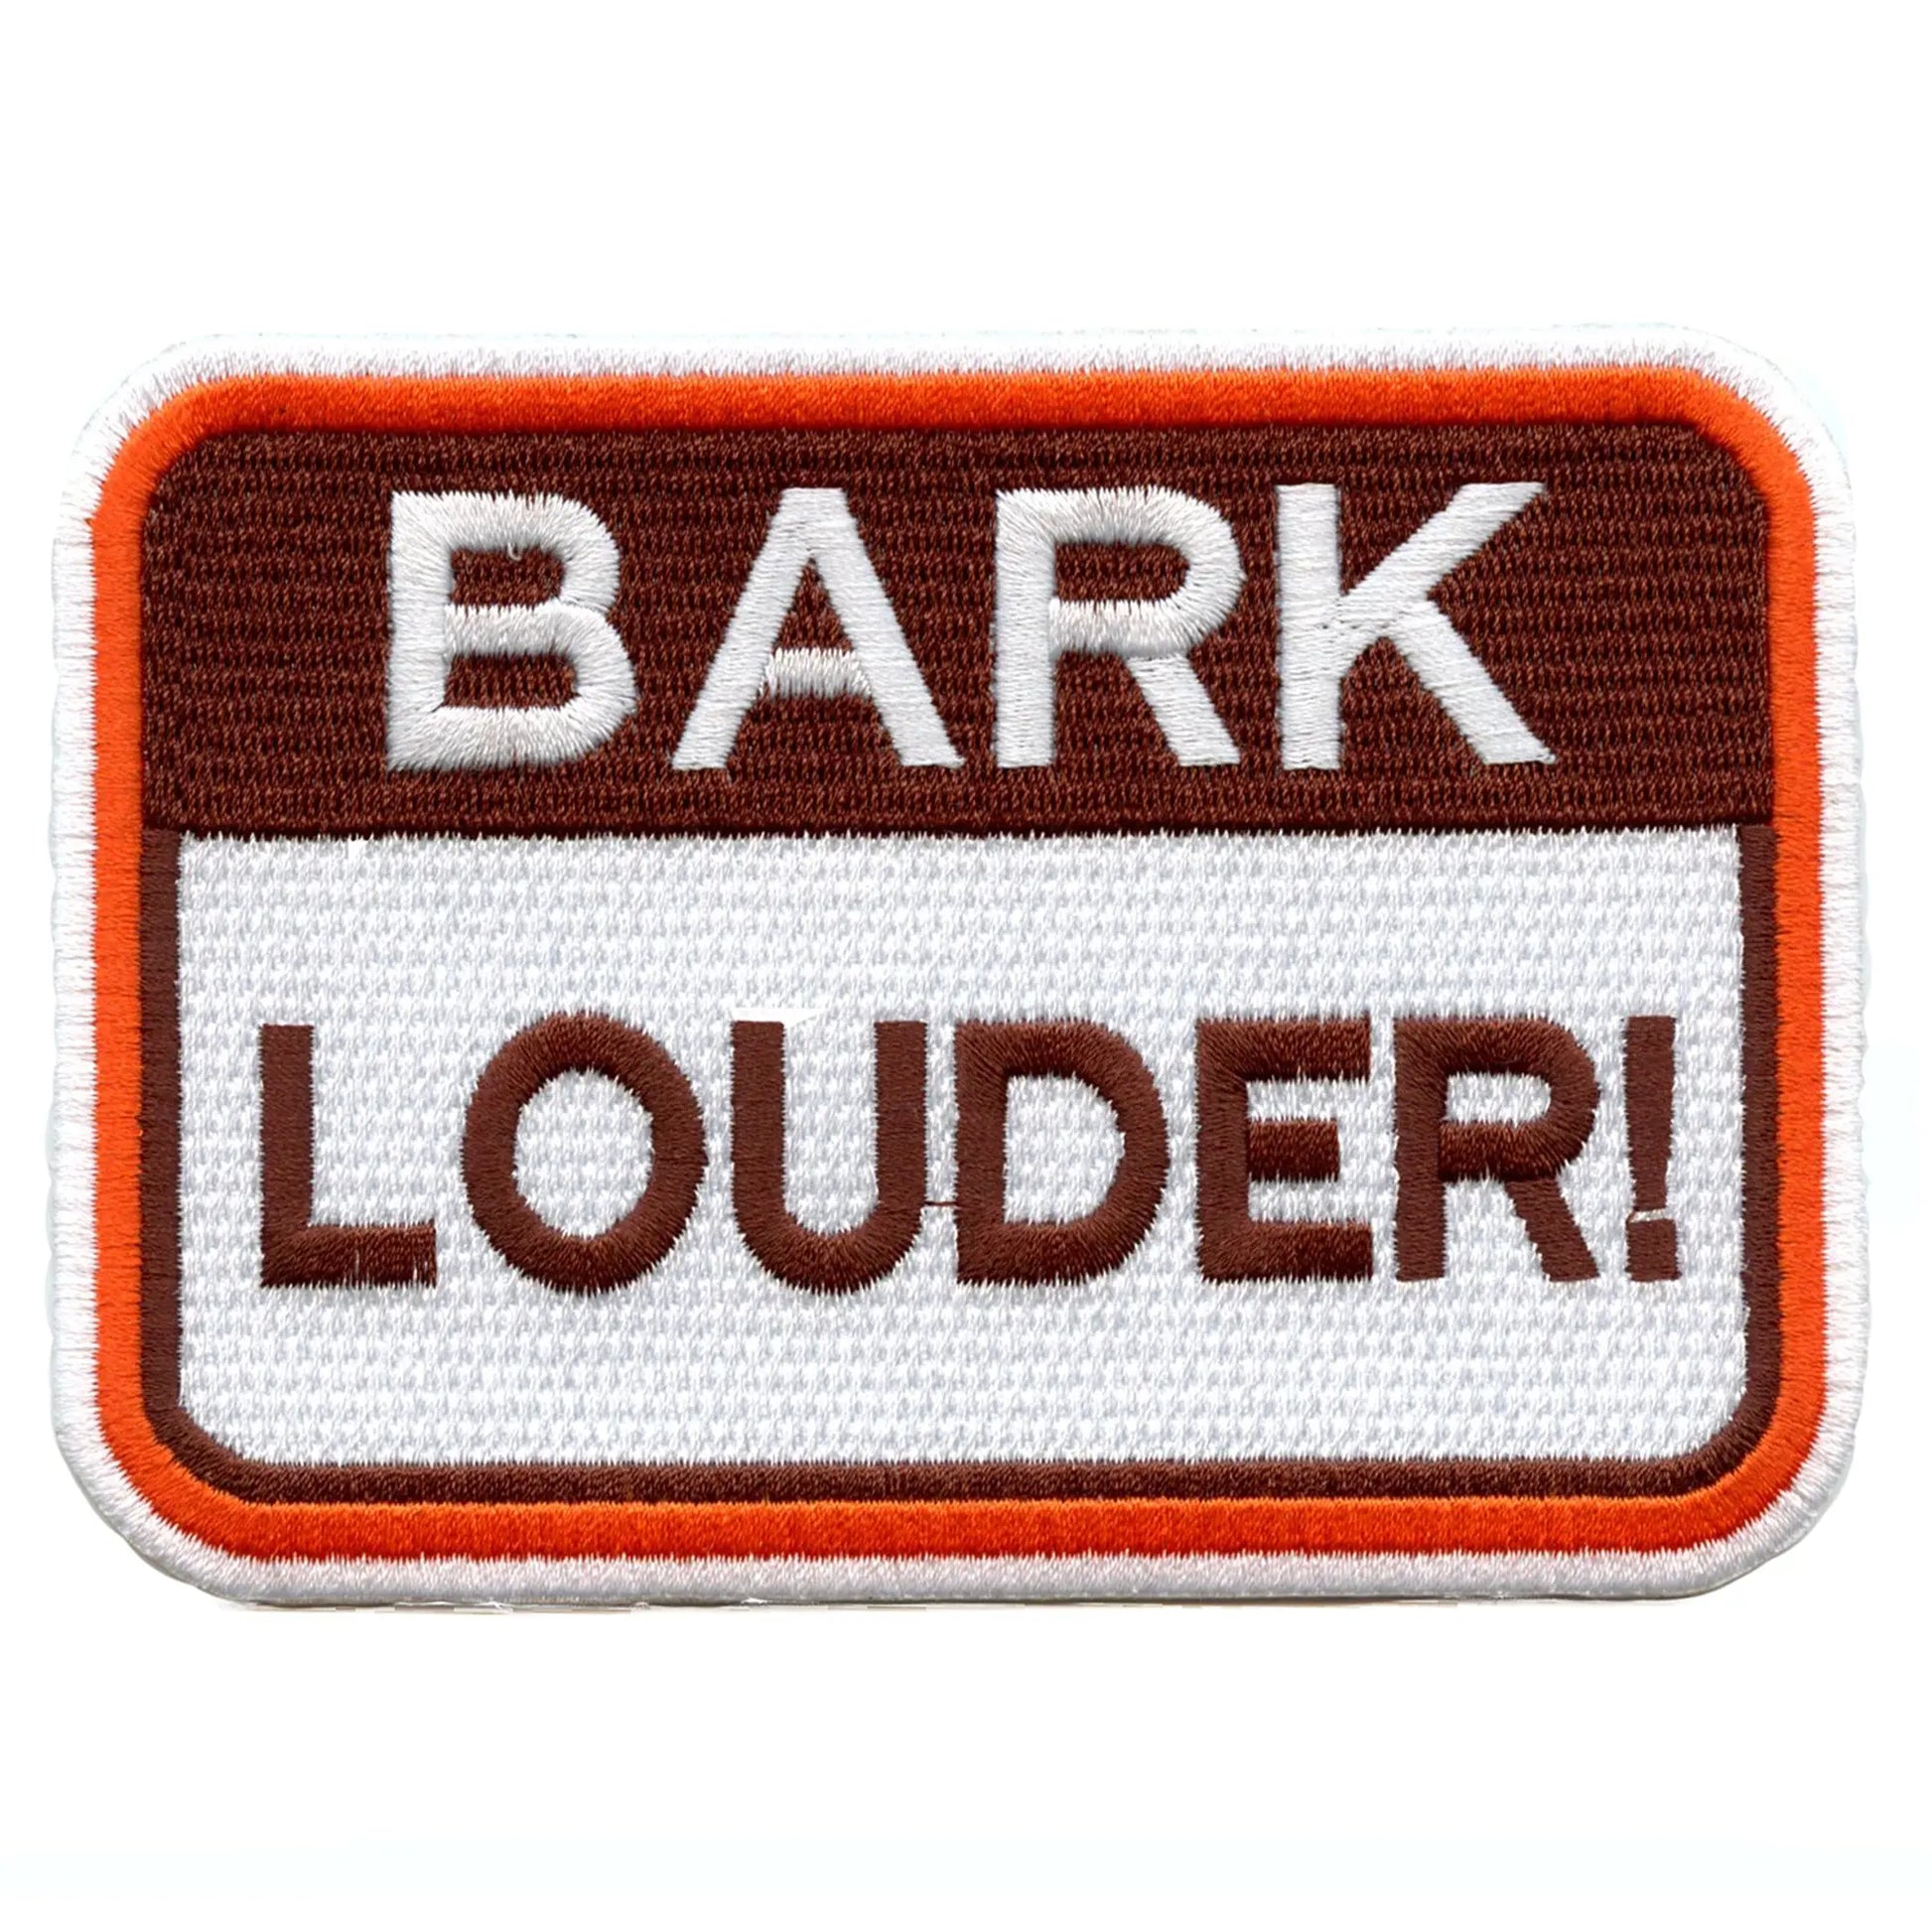 Cleveland Bark Louder Patch Ohio Football Spirt Sign Embroidered Iron On